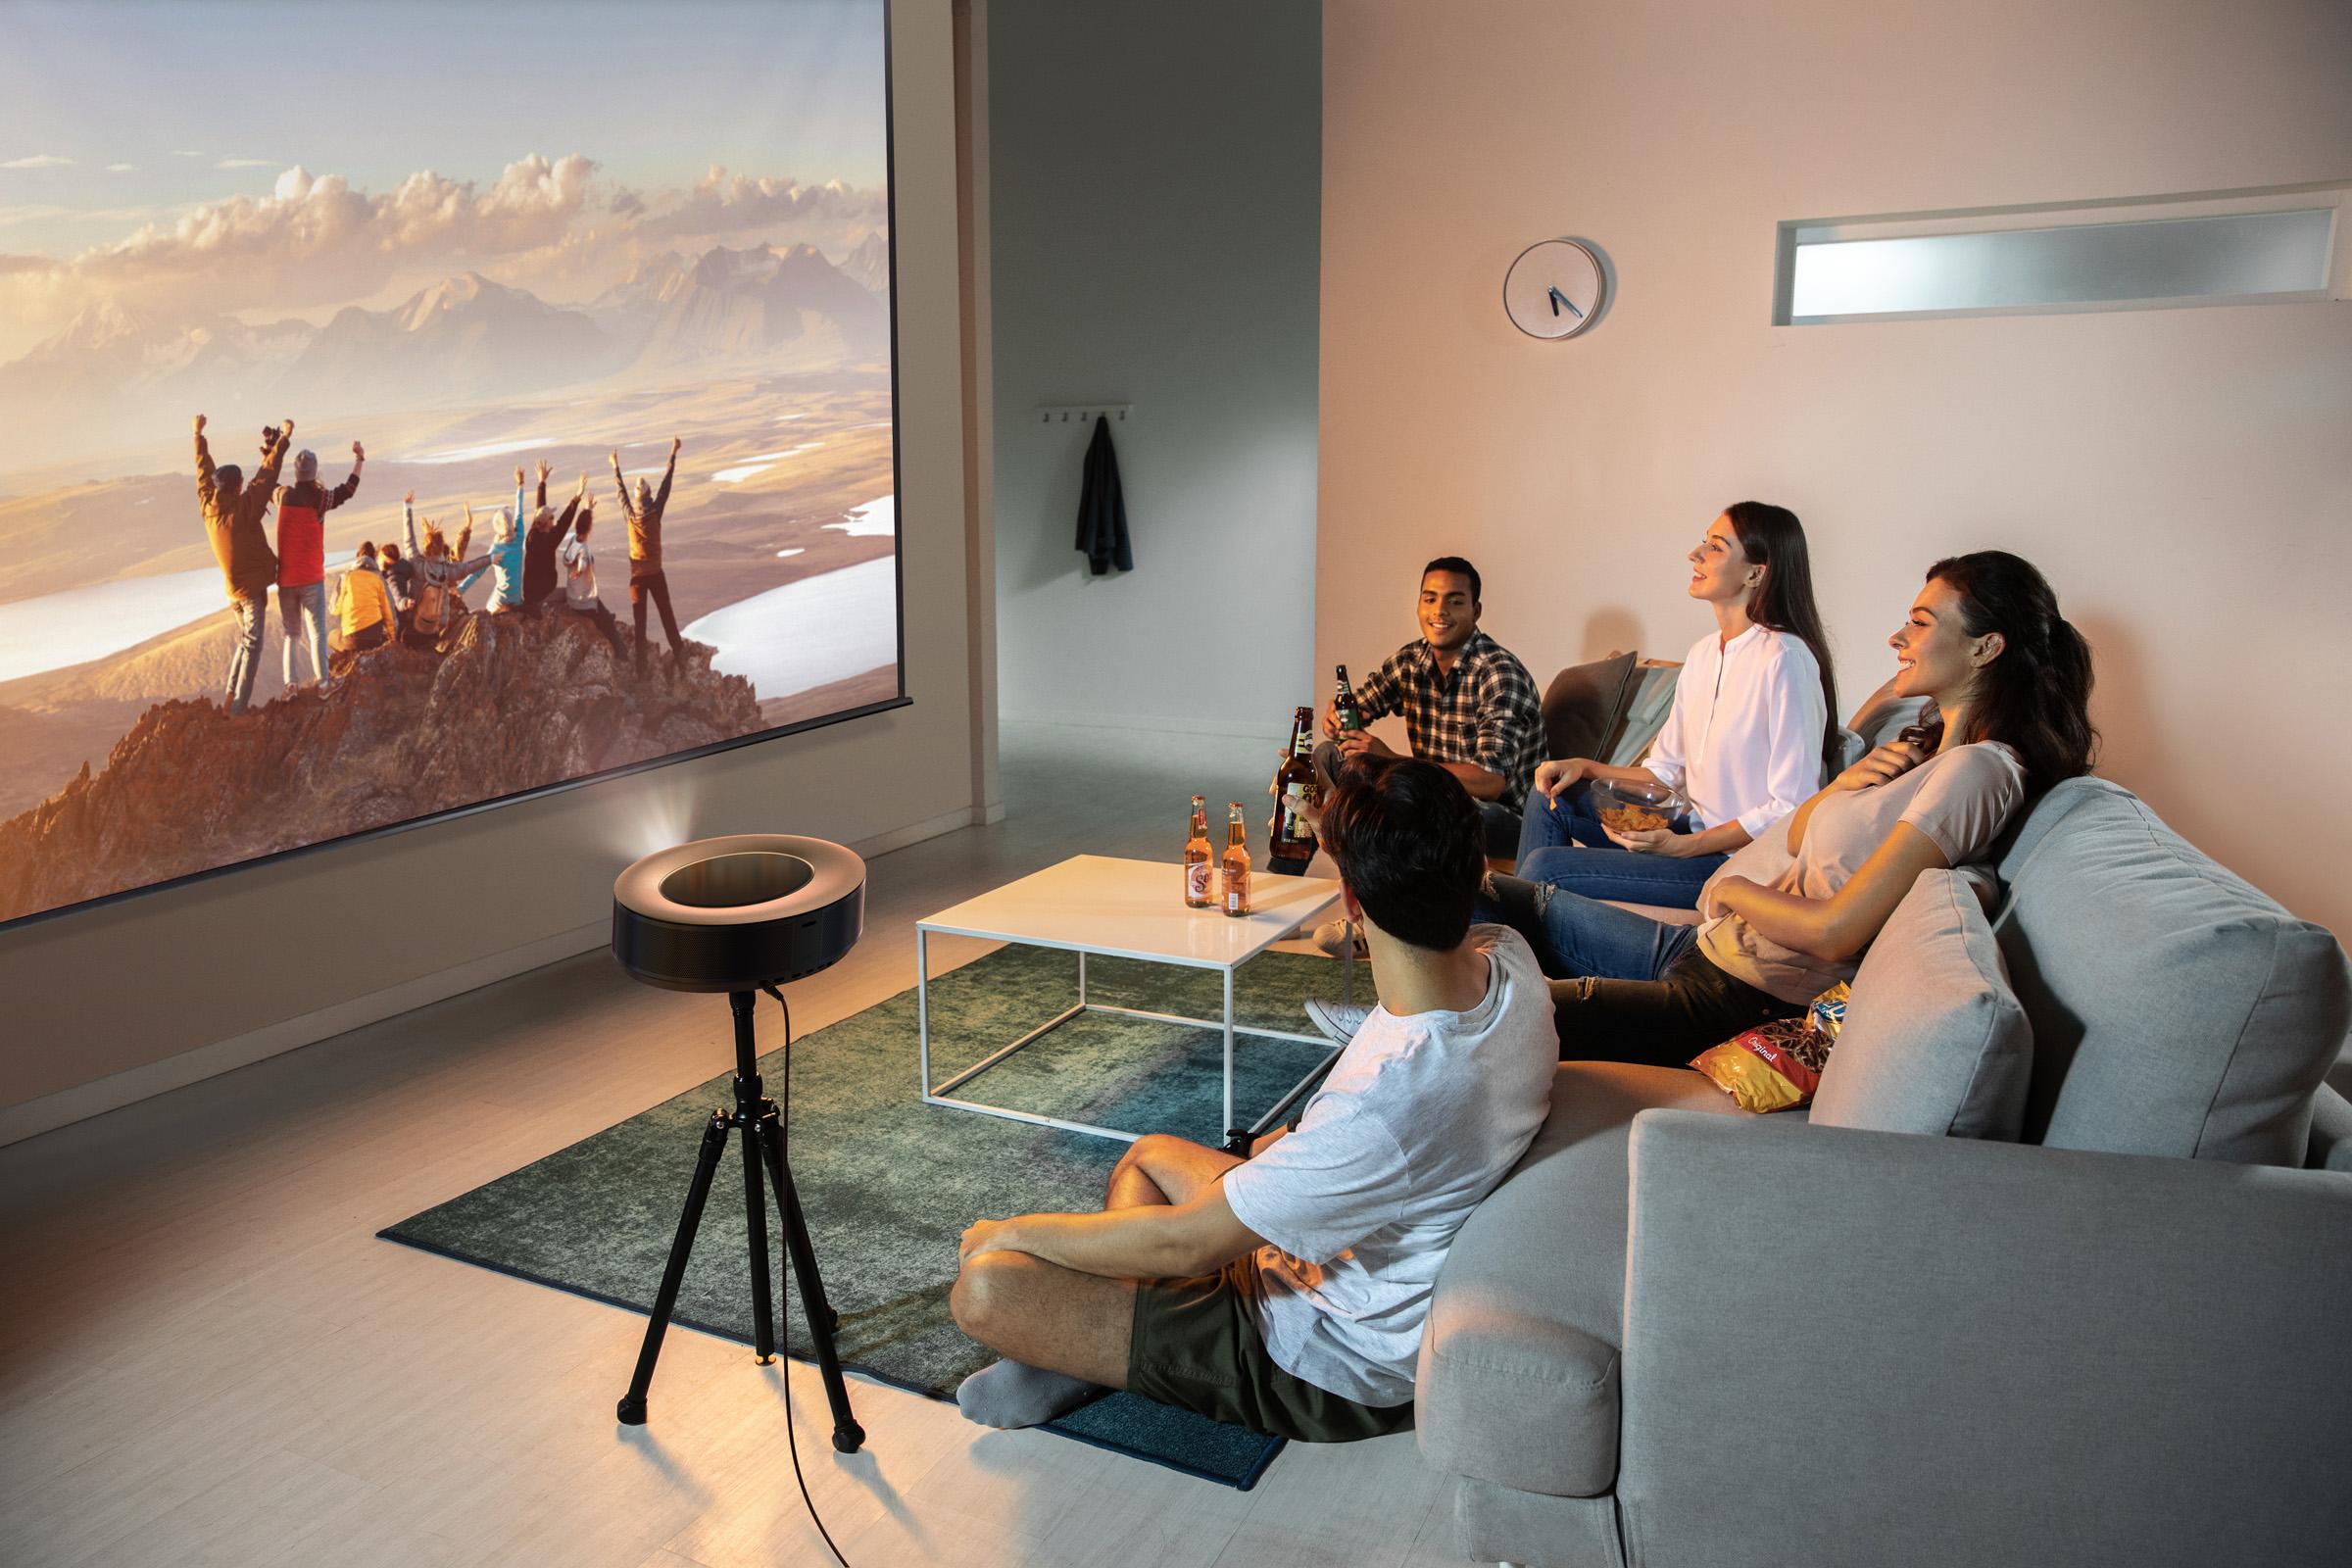 Anker Nebula Cosmos Max 4K Projector Review - Is it the Ideal